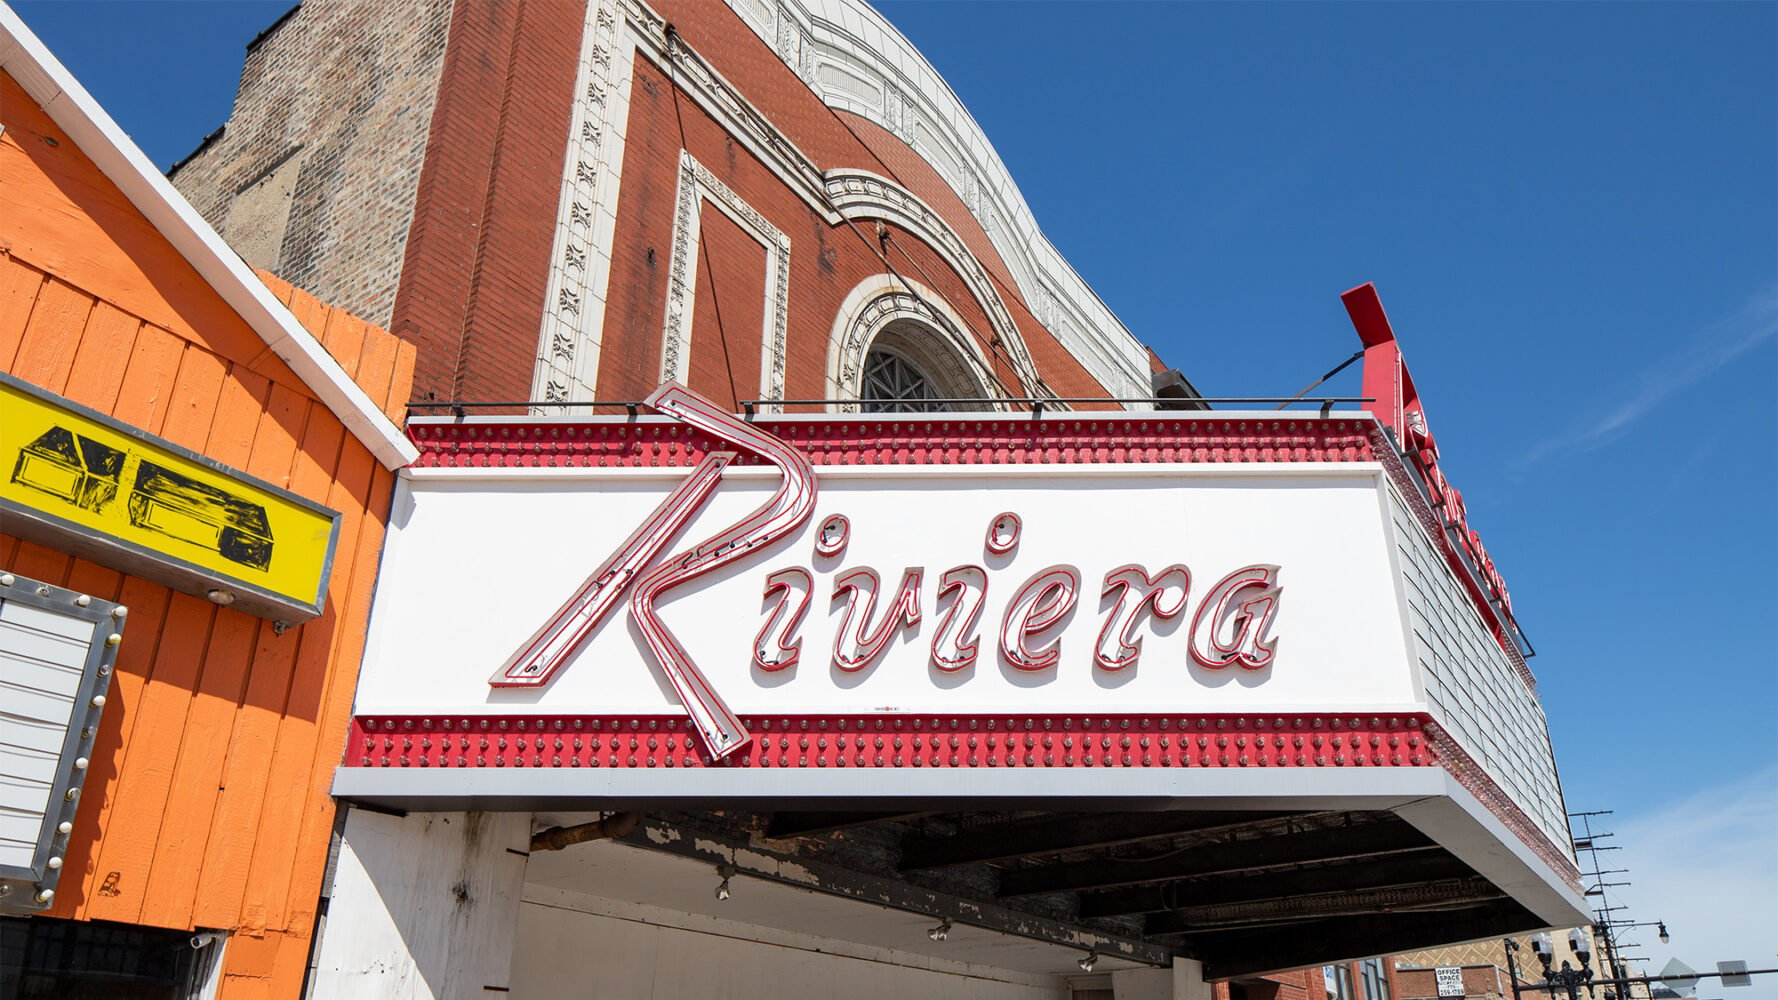 Detail of the marquee of the Riviera